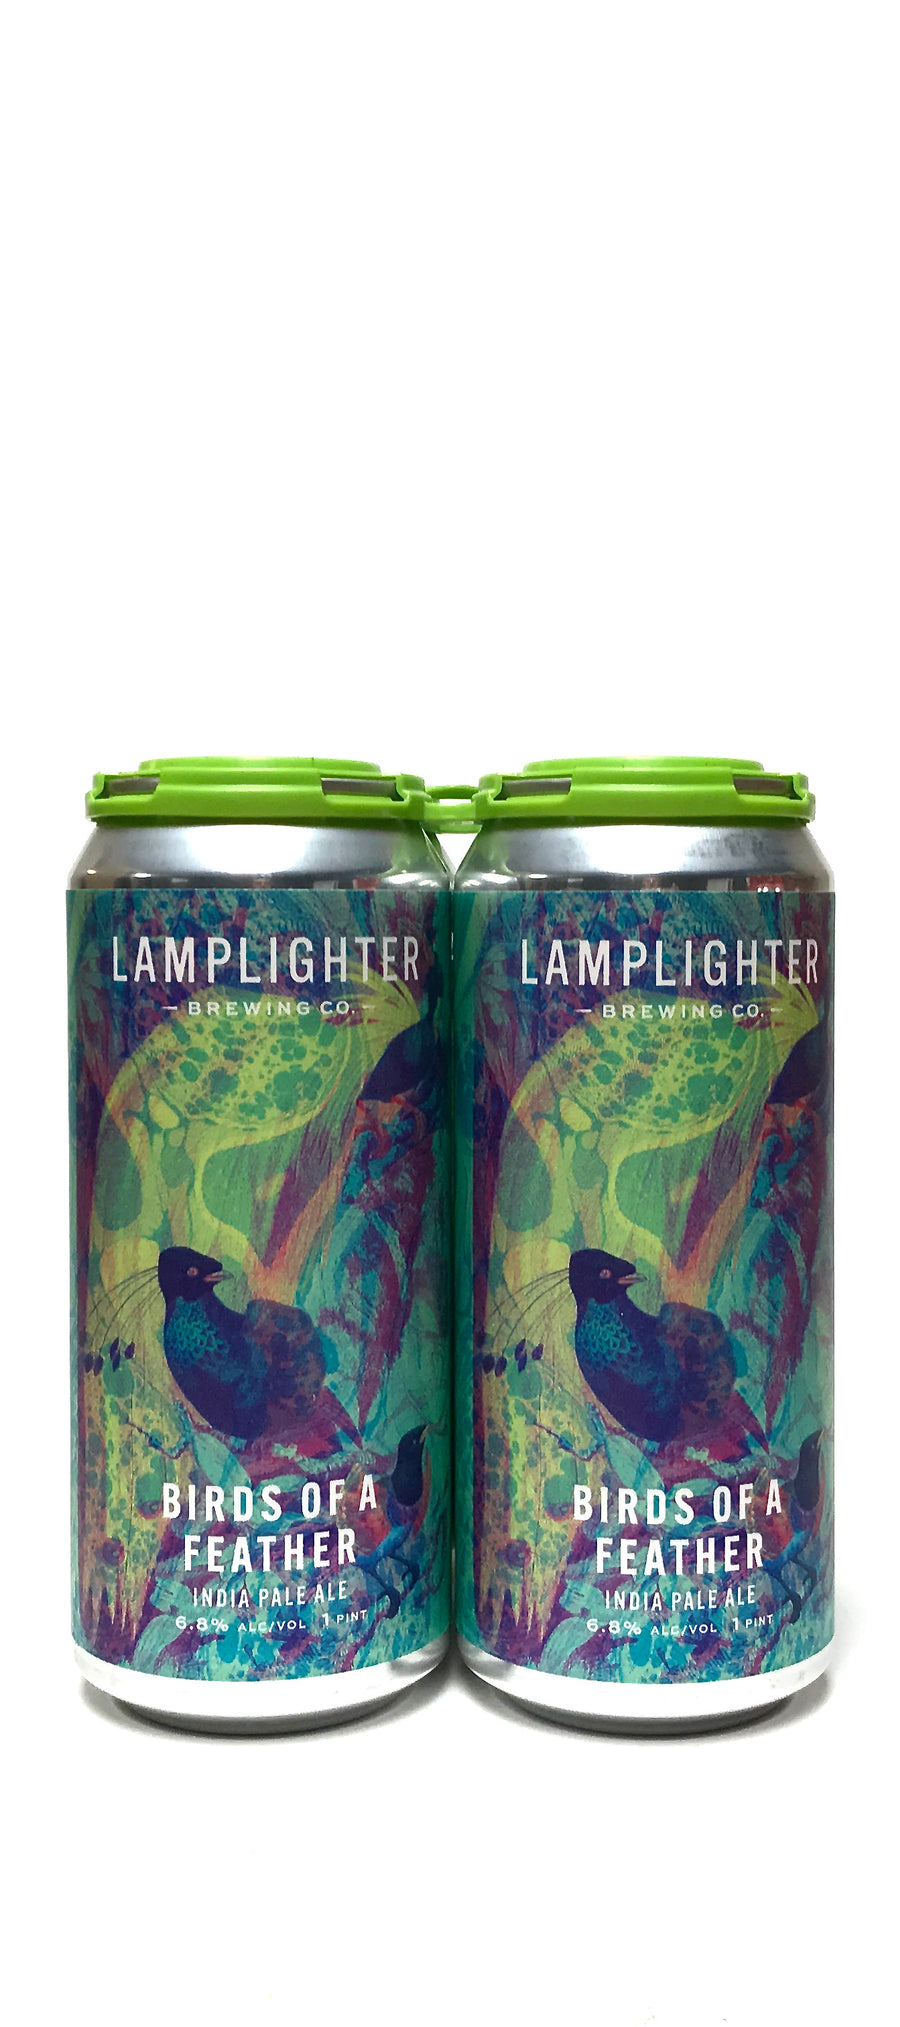 Lamplighter Birds of a Feather IPA 16oz Can 4-Pack